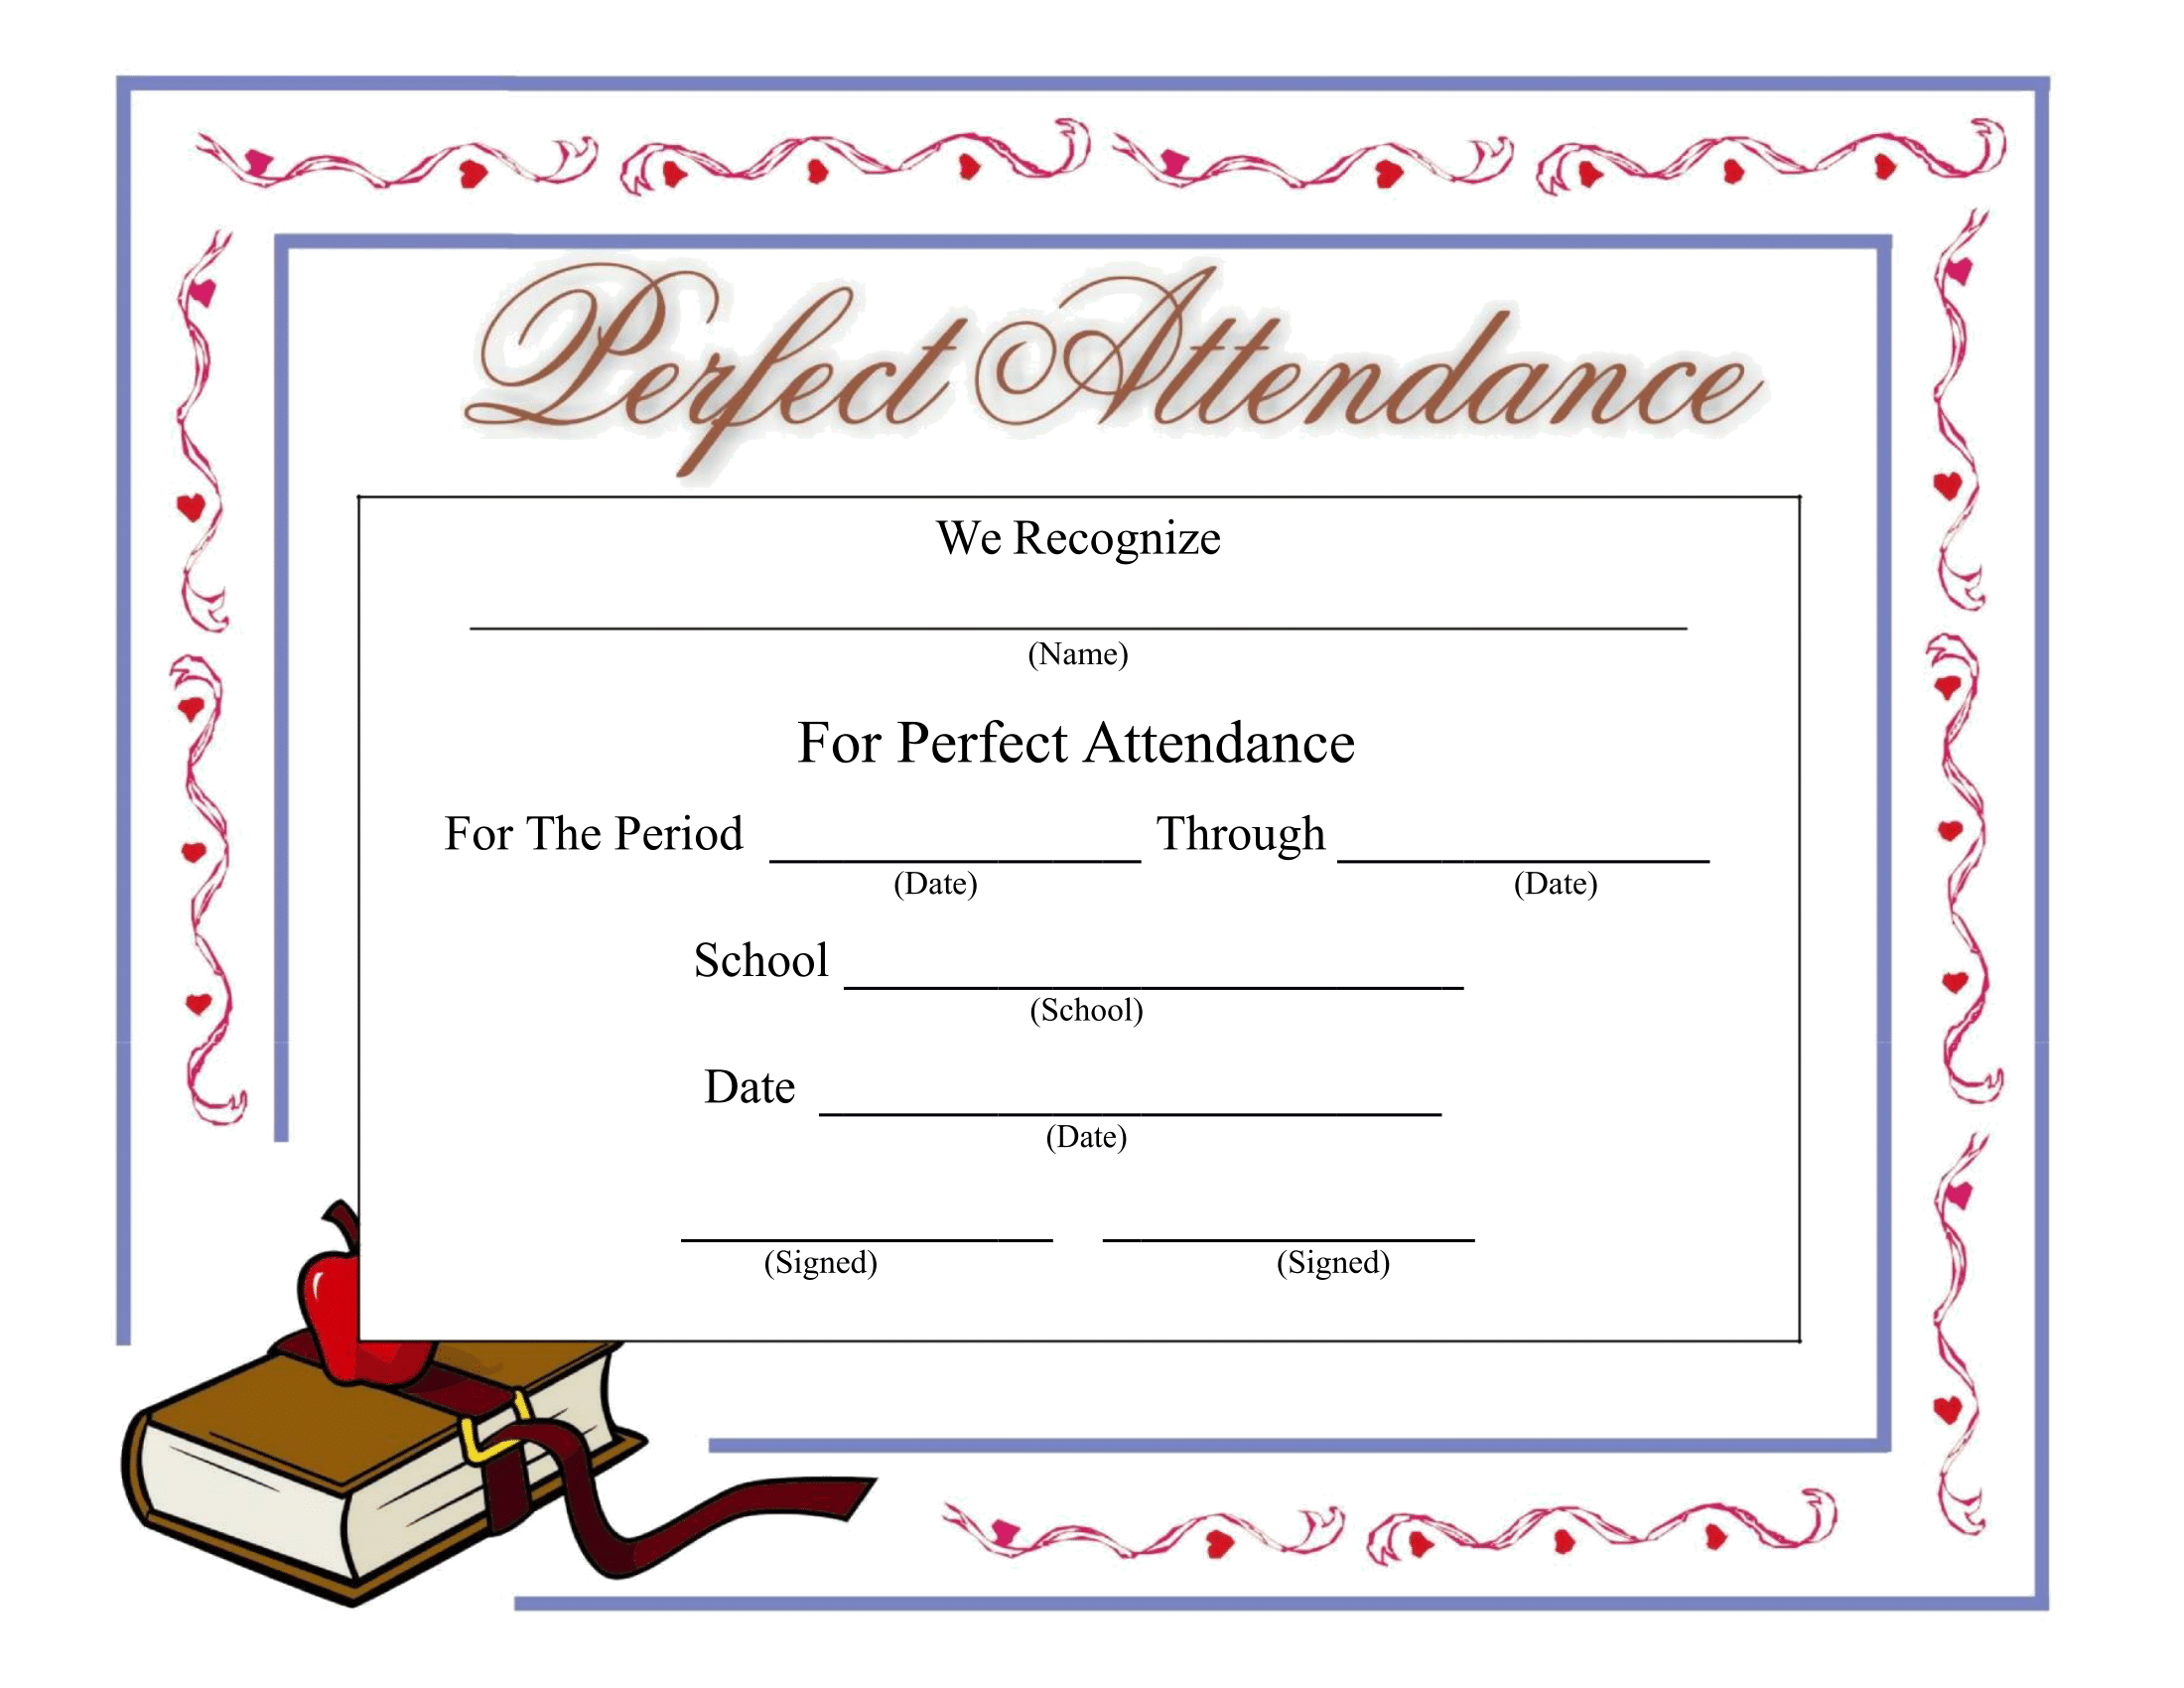 Perfect Attendance Certificate - Download A Free Template Throughout Perfect Attendance Certificate Template